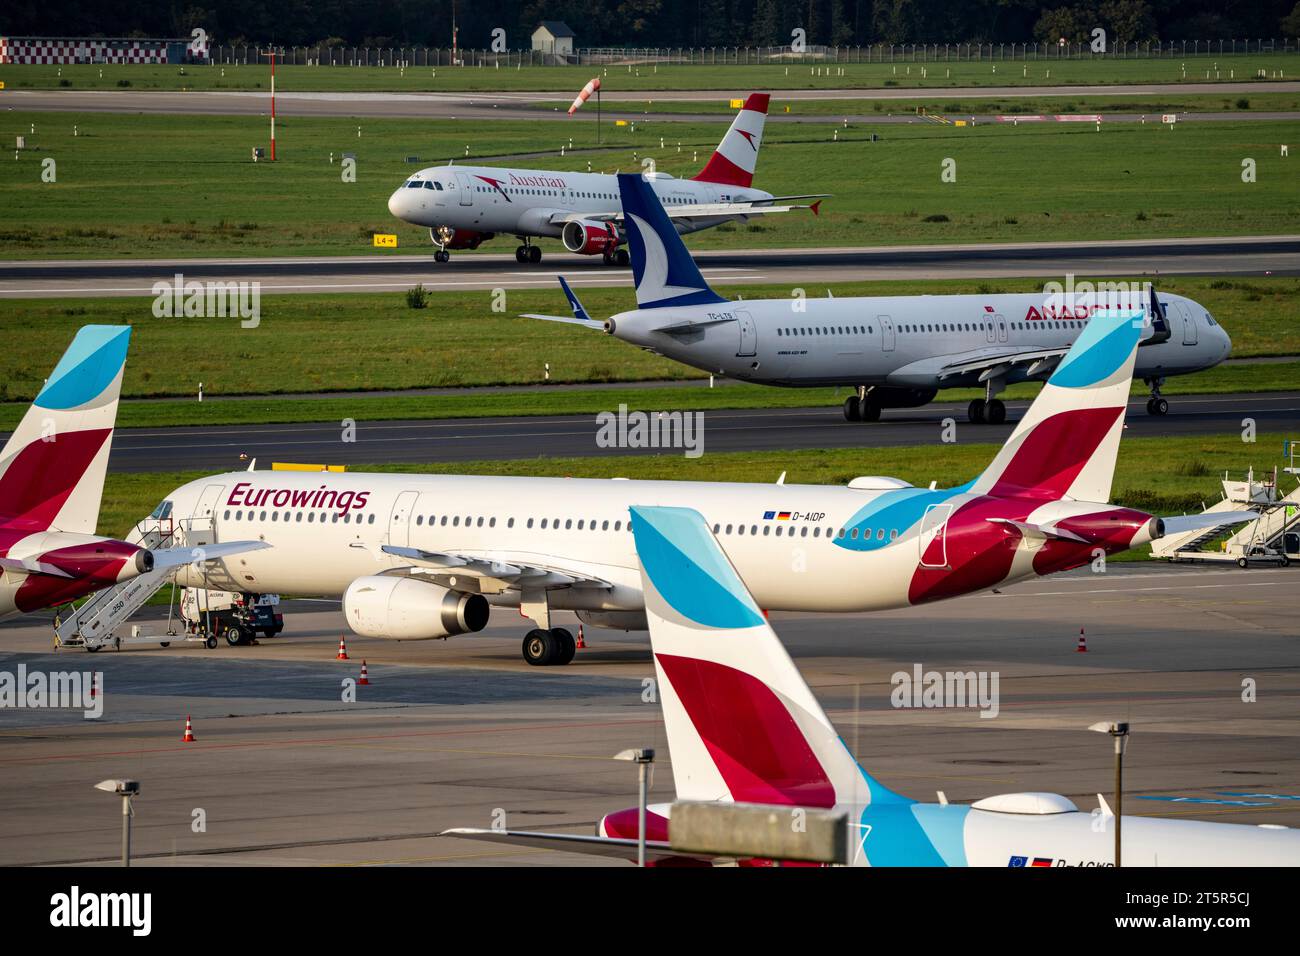 Düsseldorf Airport, Anadolujet aircraft on the taxiway, Eurowings Airbus in parking position, Austrian Airbus landing, Stock Photo